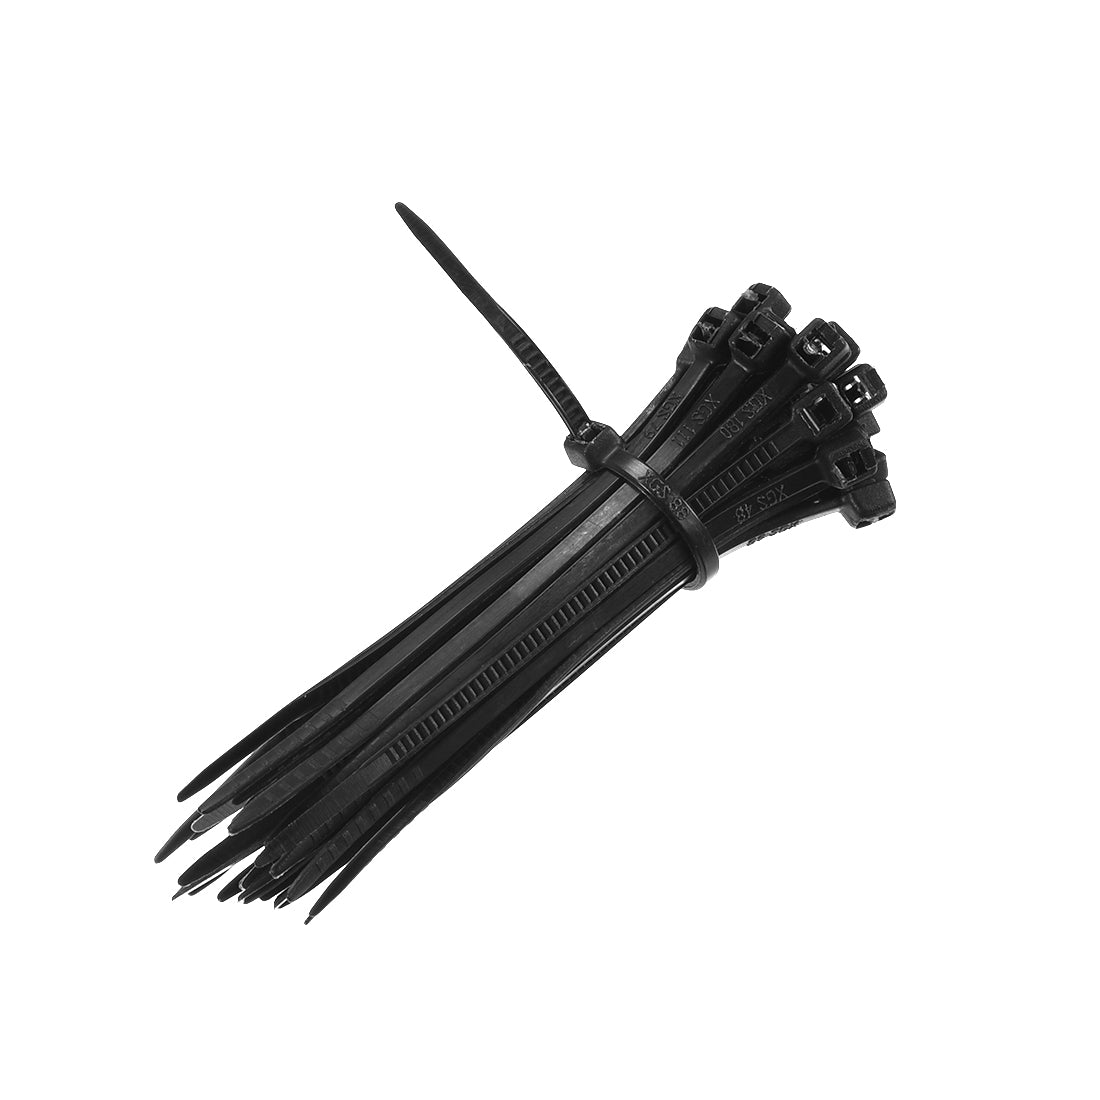 uxcell Uxcell Cable Zip Ties 120mmx1.8mm Self-Locking Nylon Tie Wraps Black 300pcs